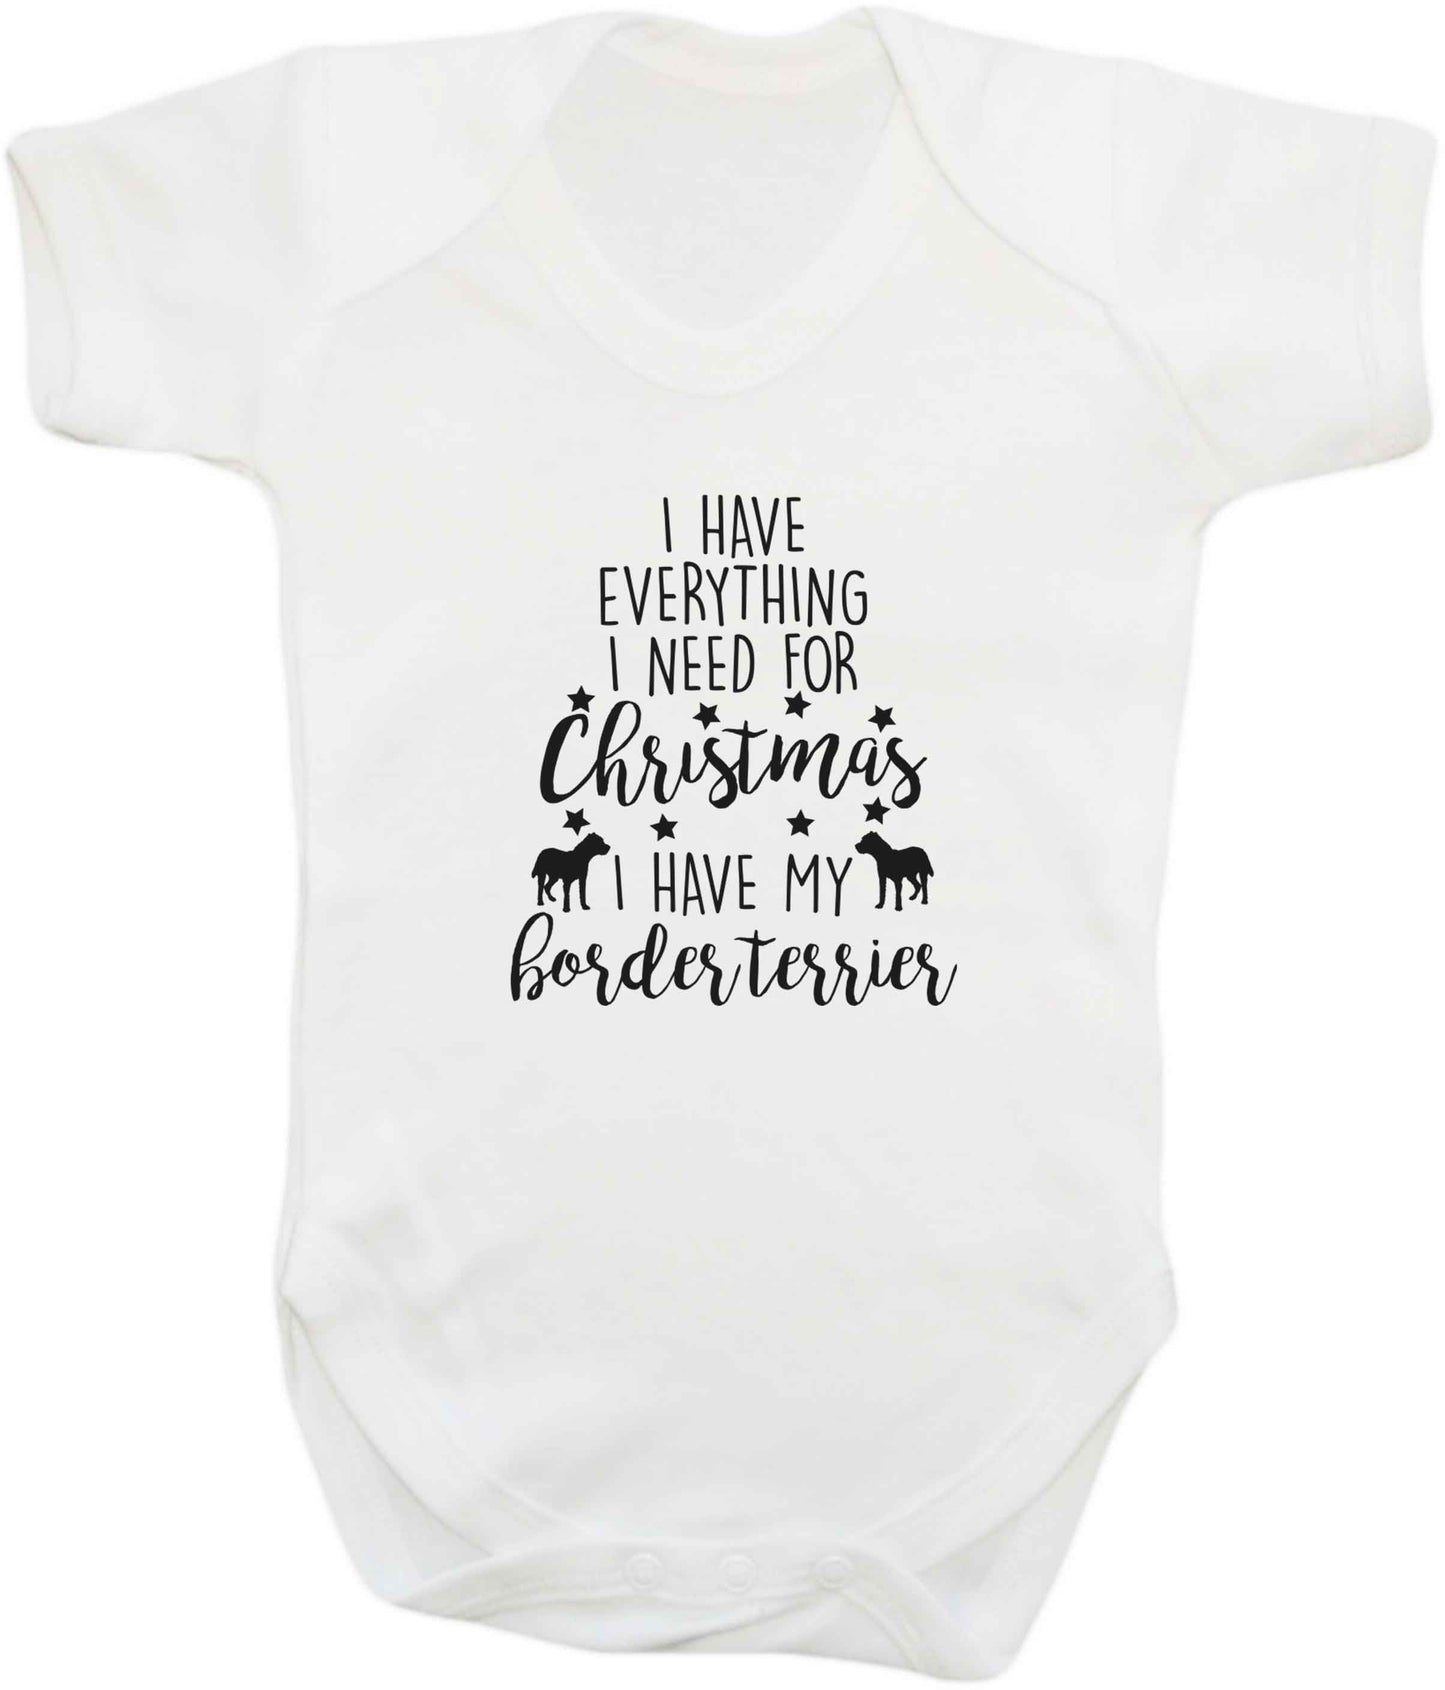 I have everything I need for Christmas I have my border terrier baby vest white 18-24 months